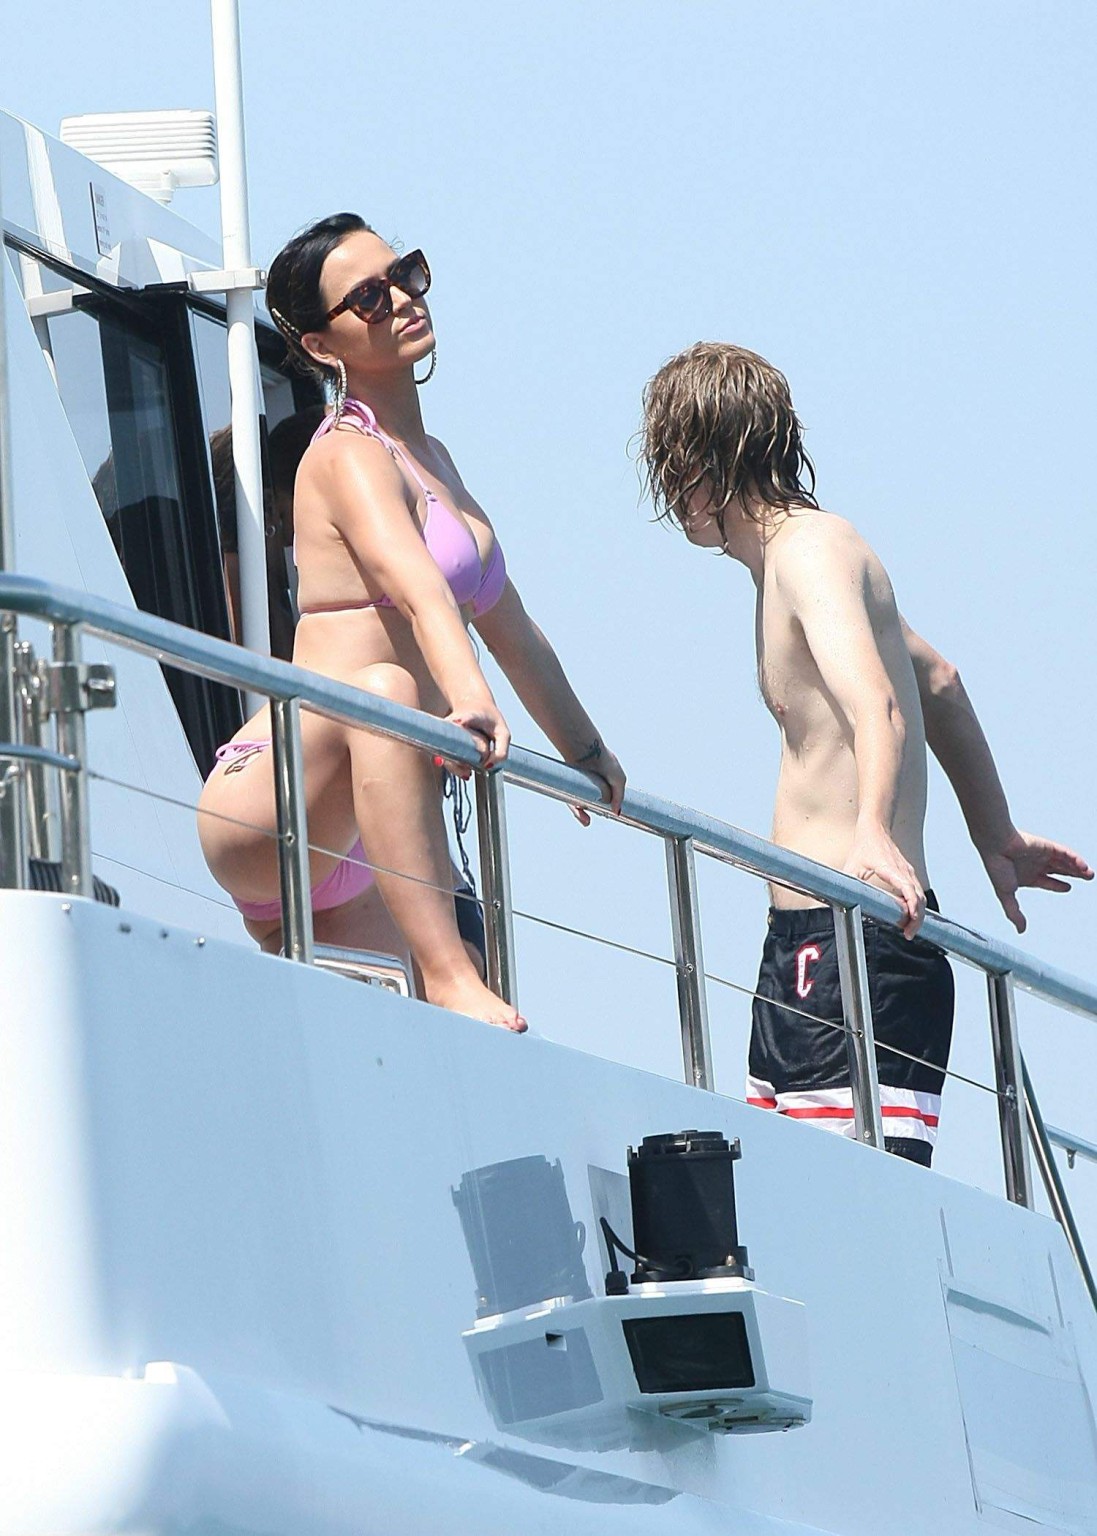 Katy Perry showing off her bikini body and cameltoe on a yacht in Sydney #75180225